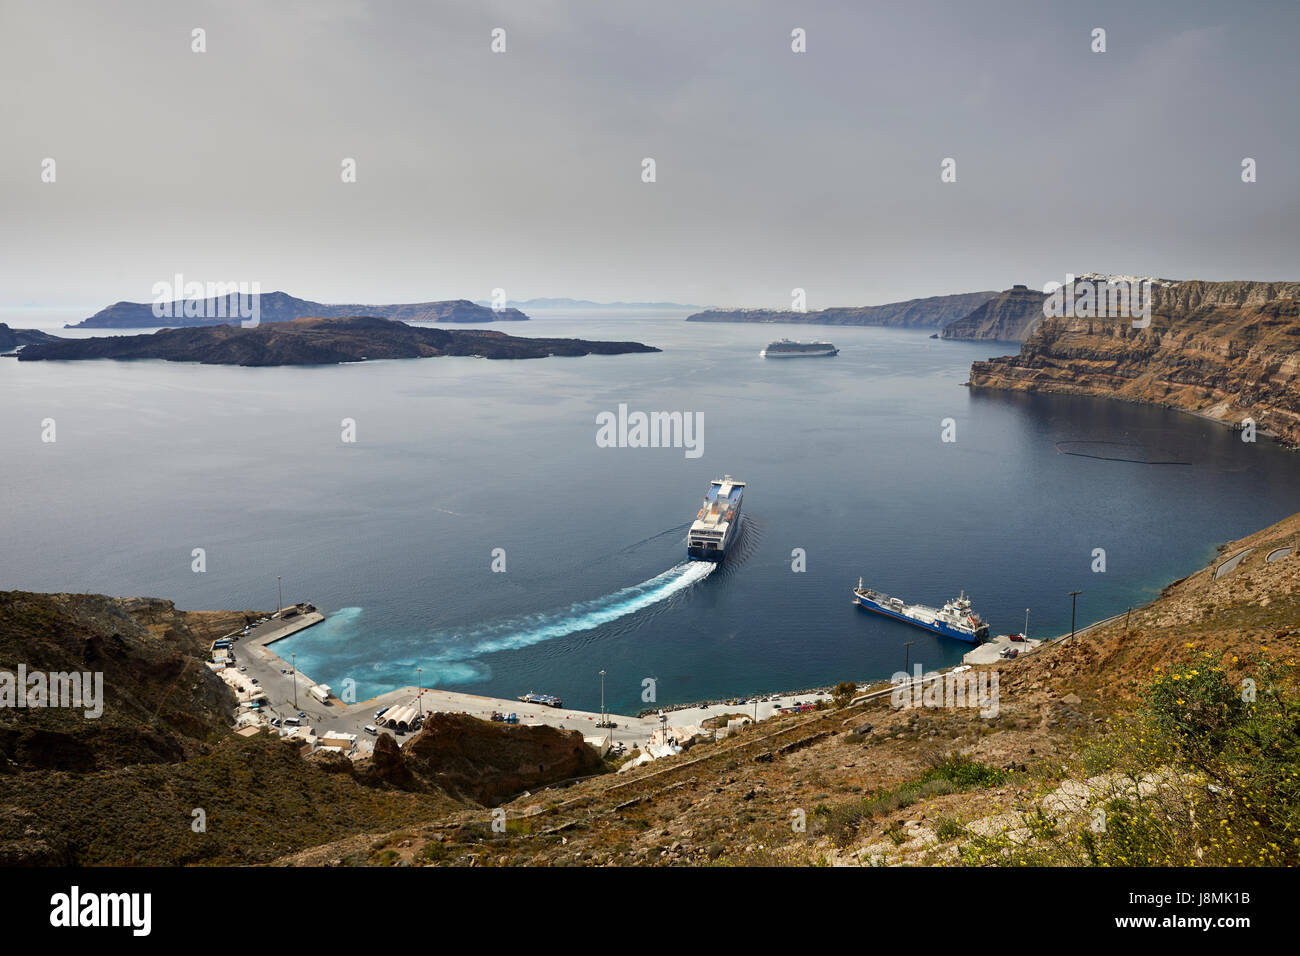 Volcanic Greek island Santorini one of the Cyclades islands in the Aegean Sea.  Ferry Port of Athinios Stock Photo